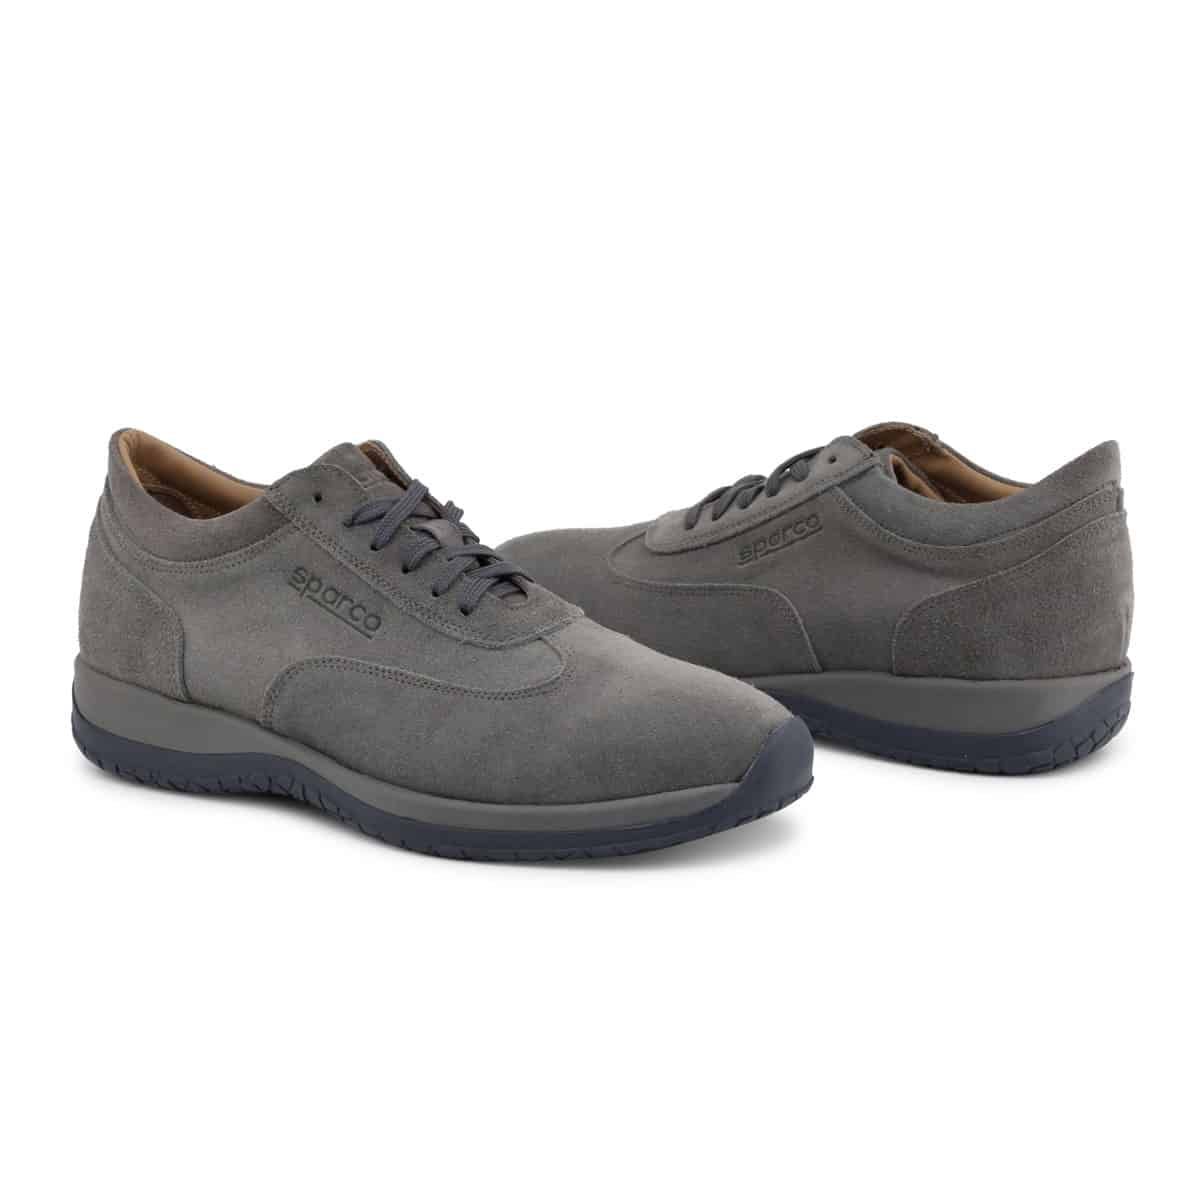 Sparco Imola-GP1 Grey Shoes Sneakers in Suede » Sparco Fashion AU|NZ